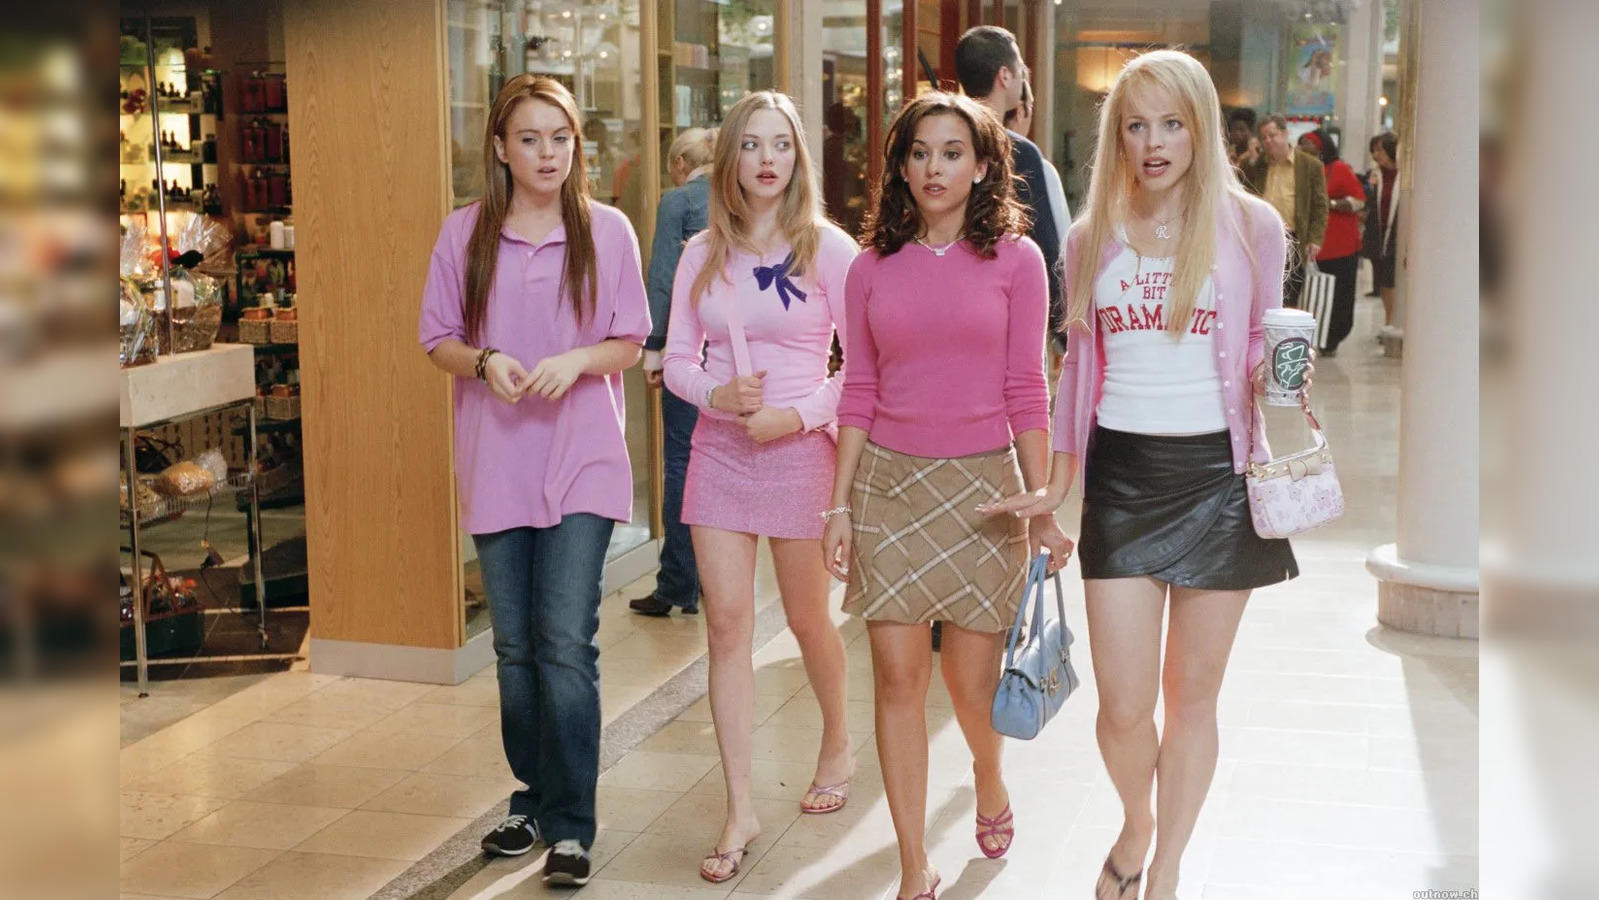 Mean Girls Trailer: 'Mean Girls': Trailer released. Here are premiere date,  cast, director, writer. Know in detail - The Economic Times